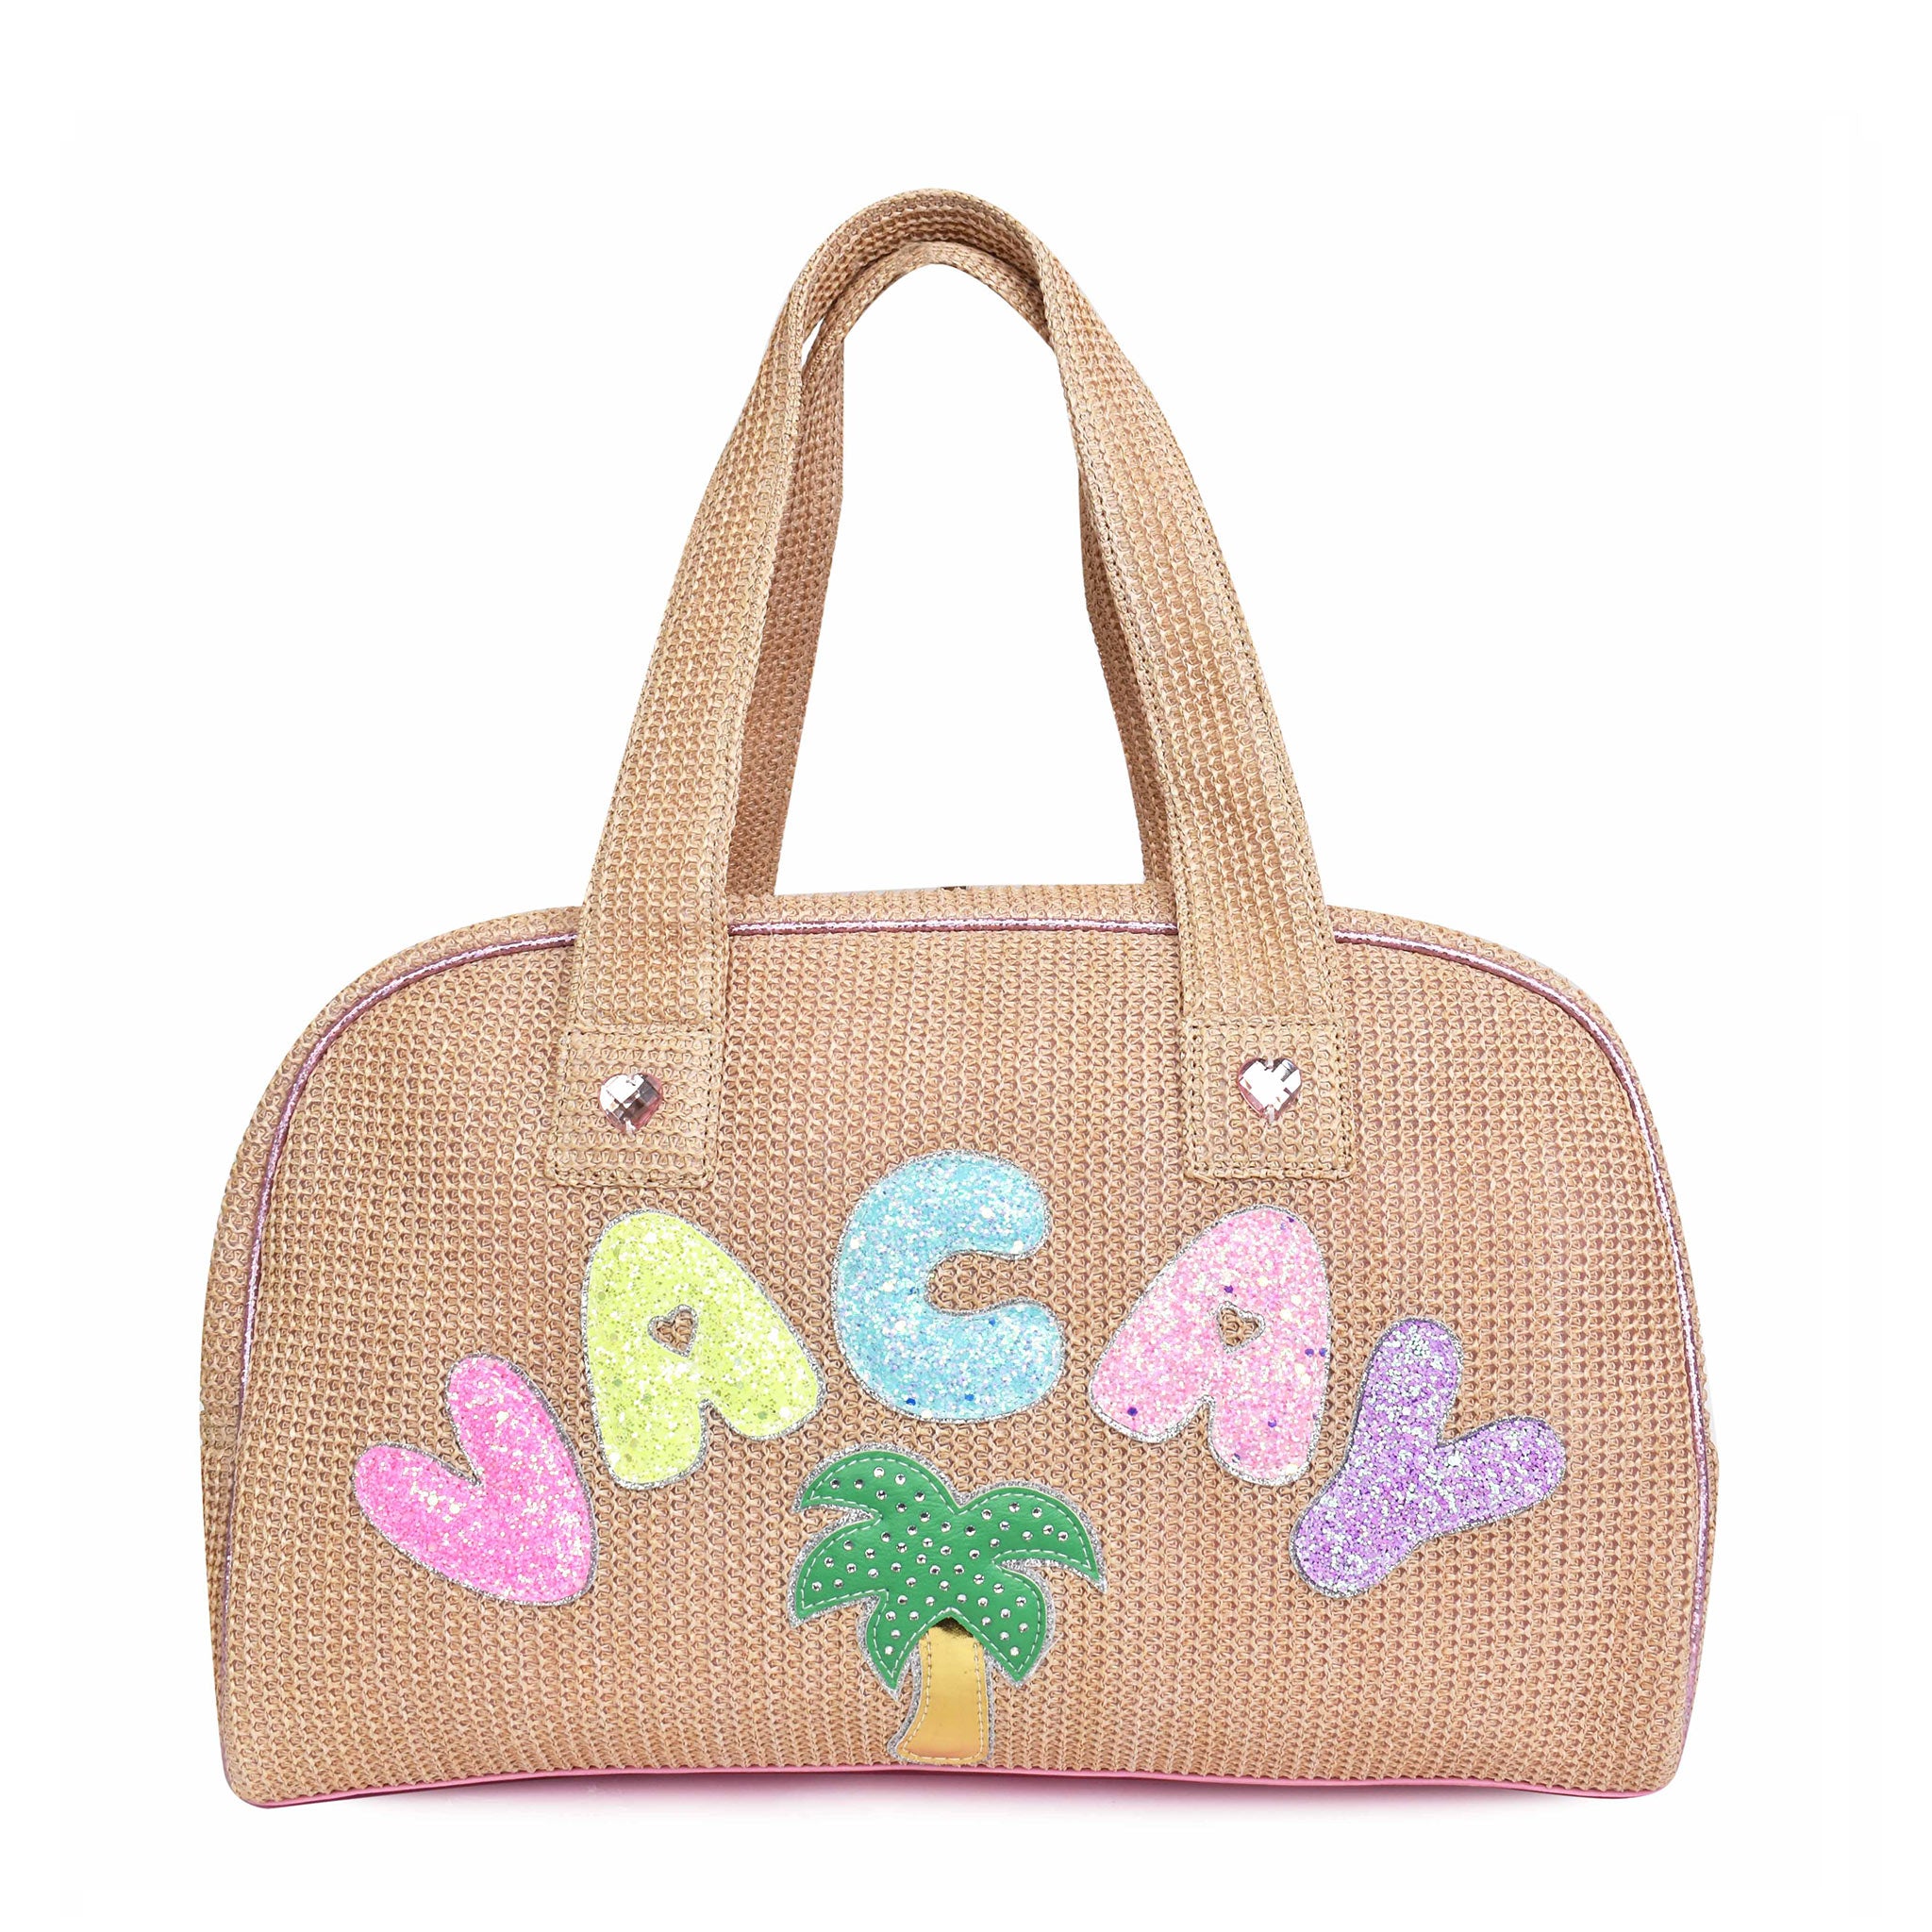 Front view of straw 'Vacay' medium duffle bag with glitter bubble-letter patches and palm tree patch